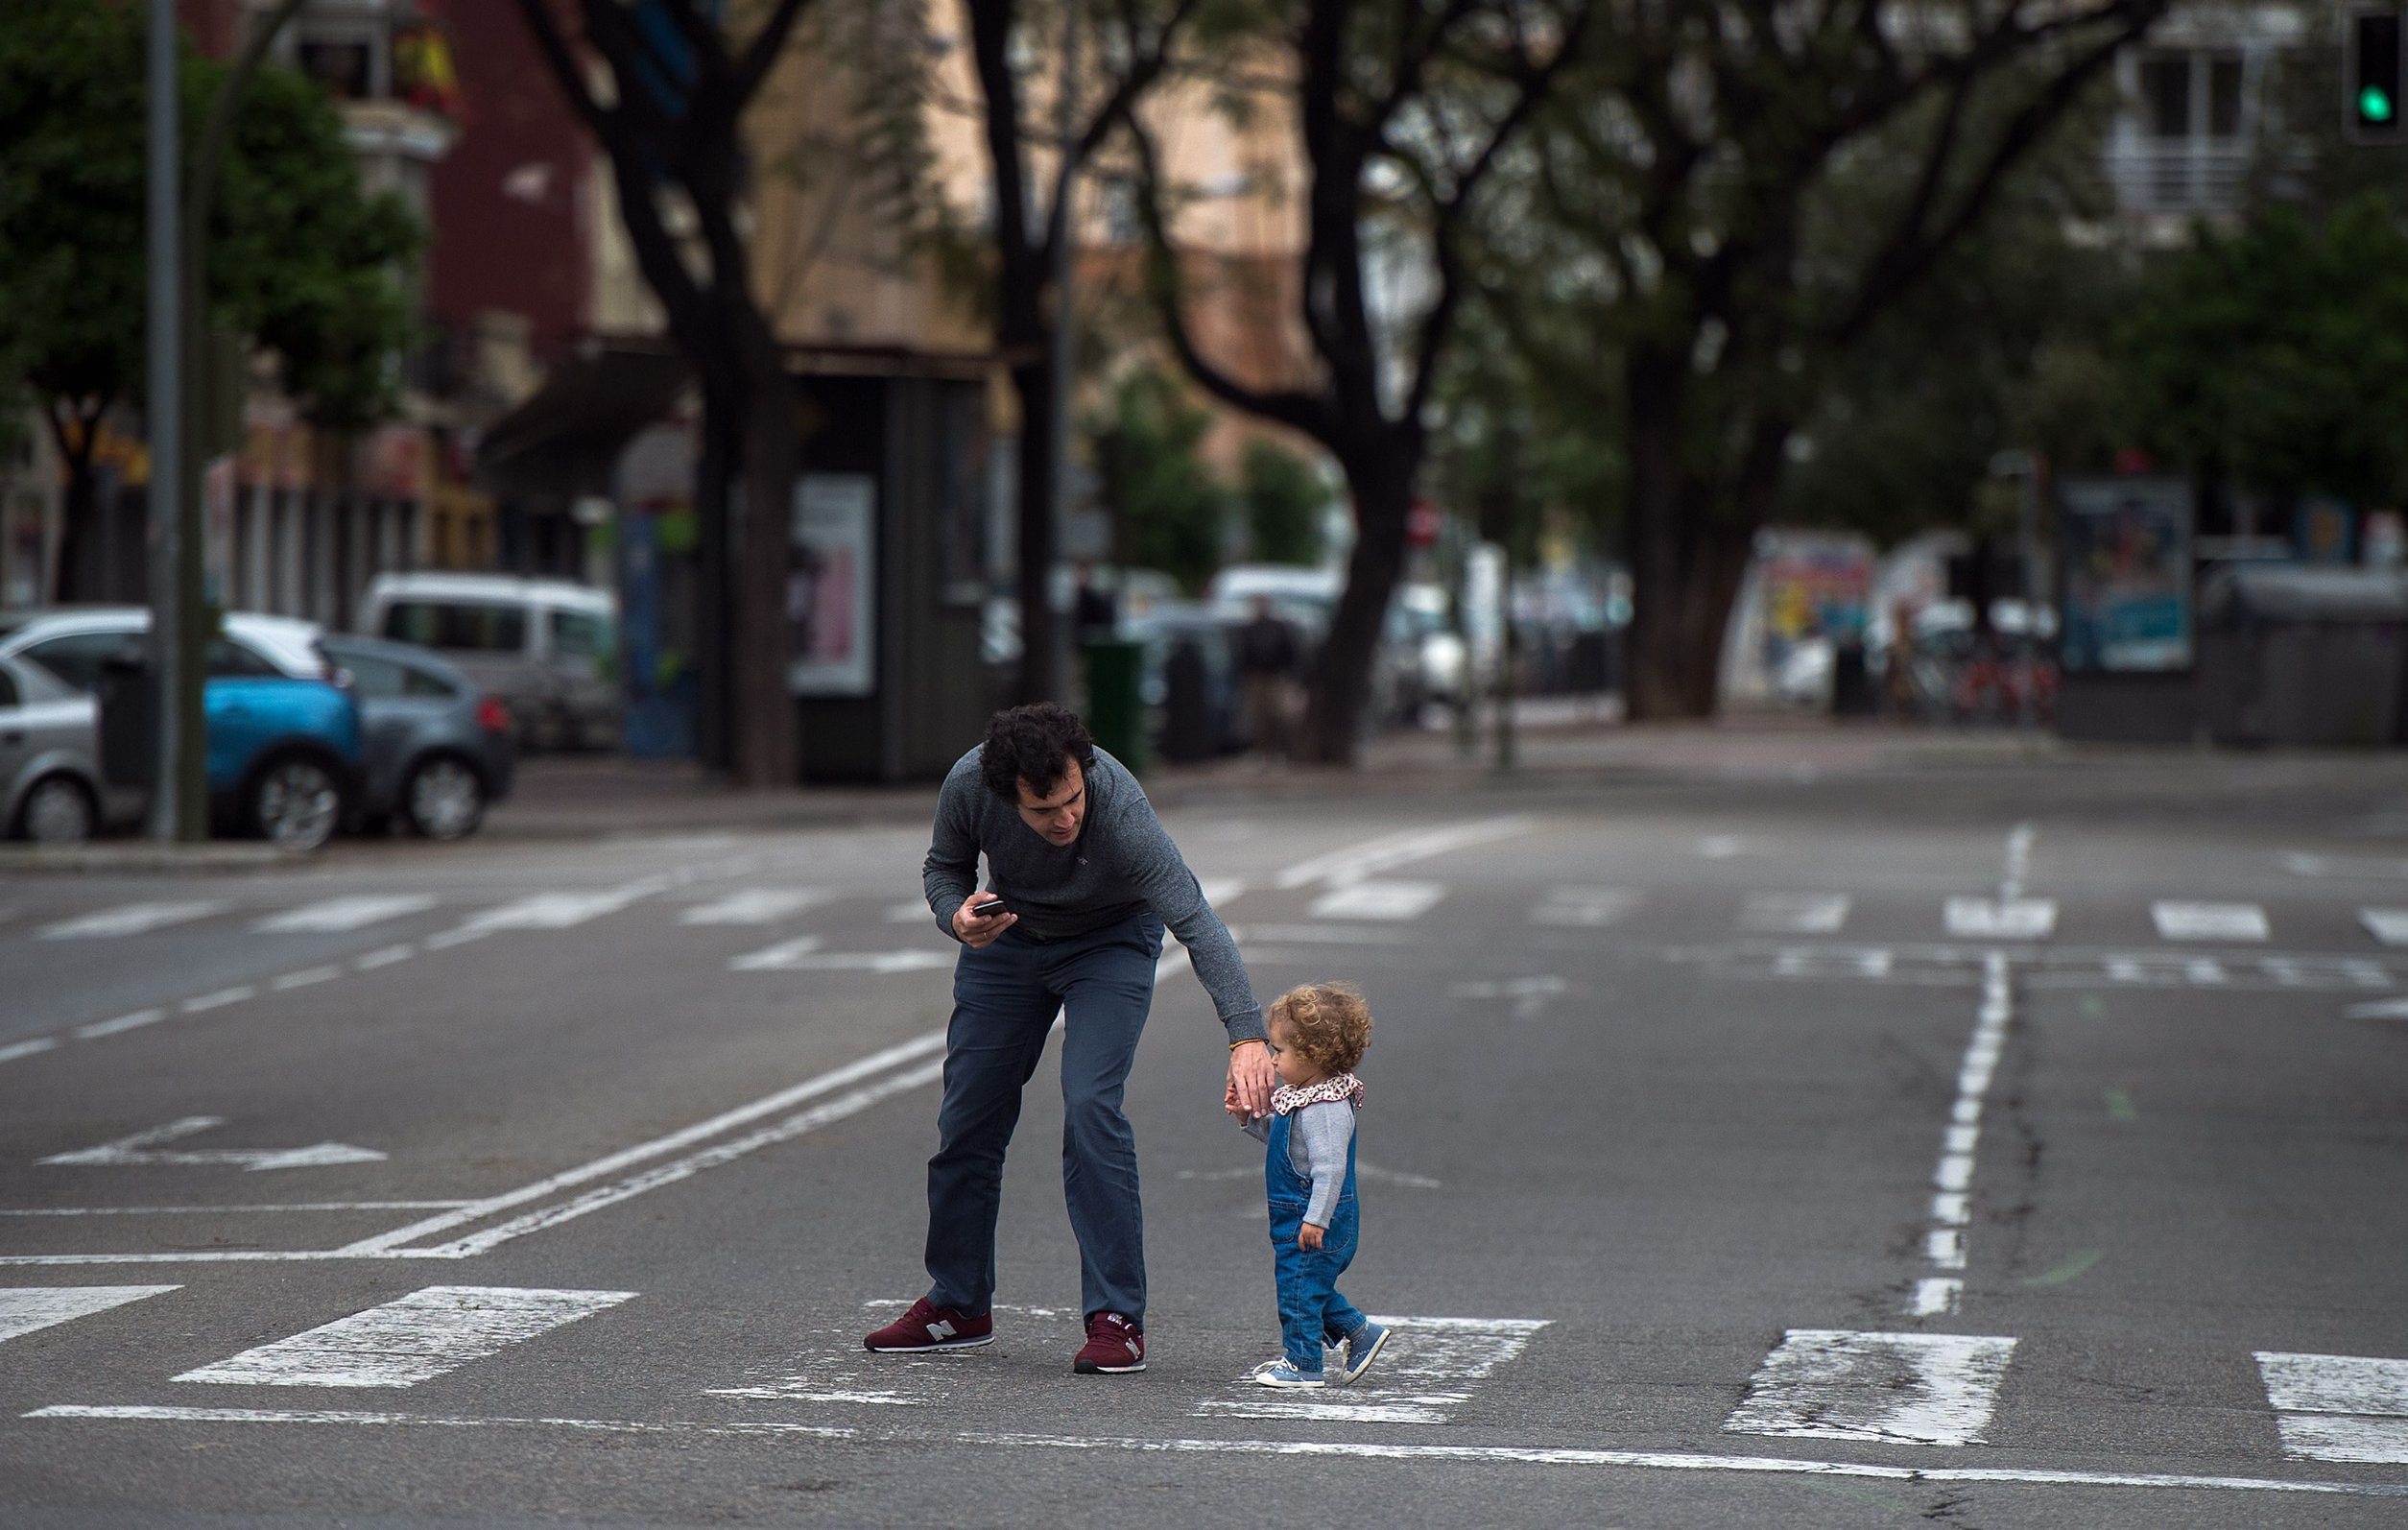 A man crosses a street with a baby in Seville on April 26, 2020 amid a national lockdown to prevent the spread of the COVID-19 disease. - After six weeks stuck at home, Spain's children were being allowed out today to run, play or go for a walk as the government eased one of the world's toughest coronavirus lockdowns. Spain is one of the hardest hit countries, with a death toll running a more than 23,000 to put it behind only the United States and Italy despite stringent restrictions imposed from March 14, including keeping all children indoors. Today, with their scooters, tricycles or in prams, the children accompanied by their parents came out onto largely deserted streets. (Photo by CRISTINA QUICLER / AFP)